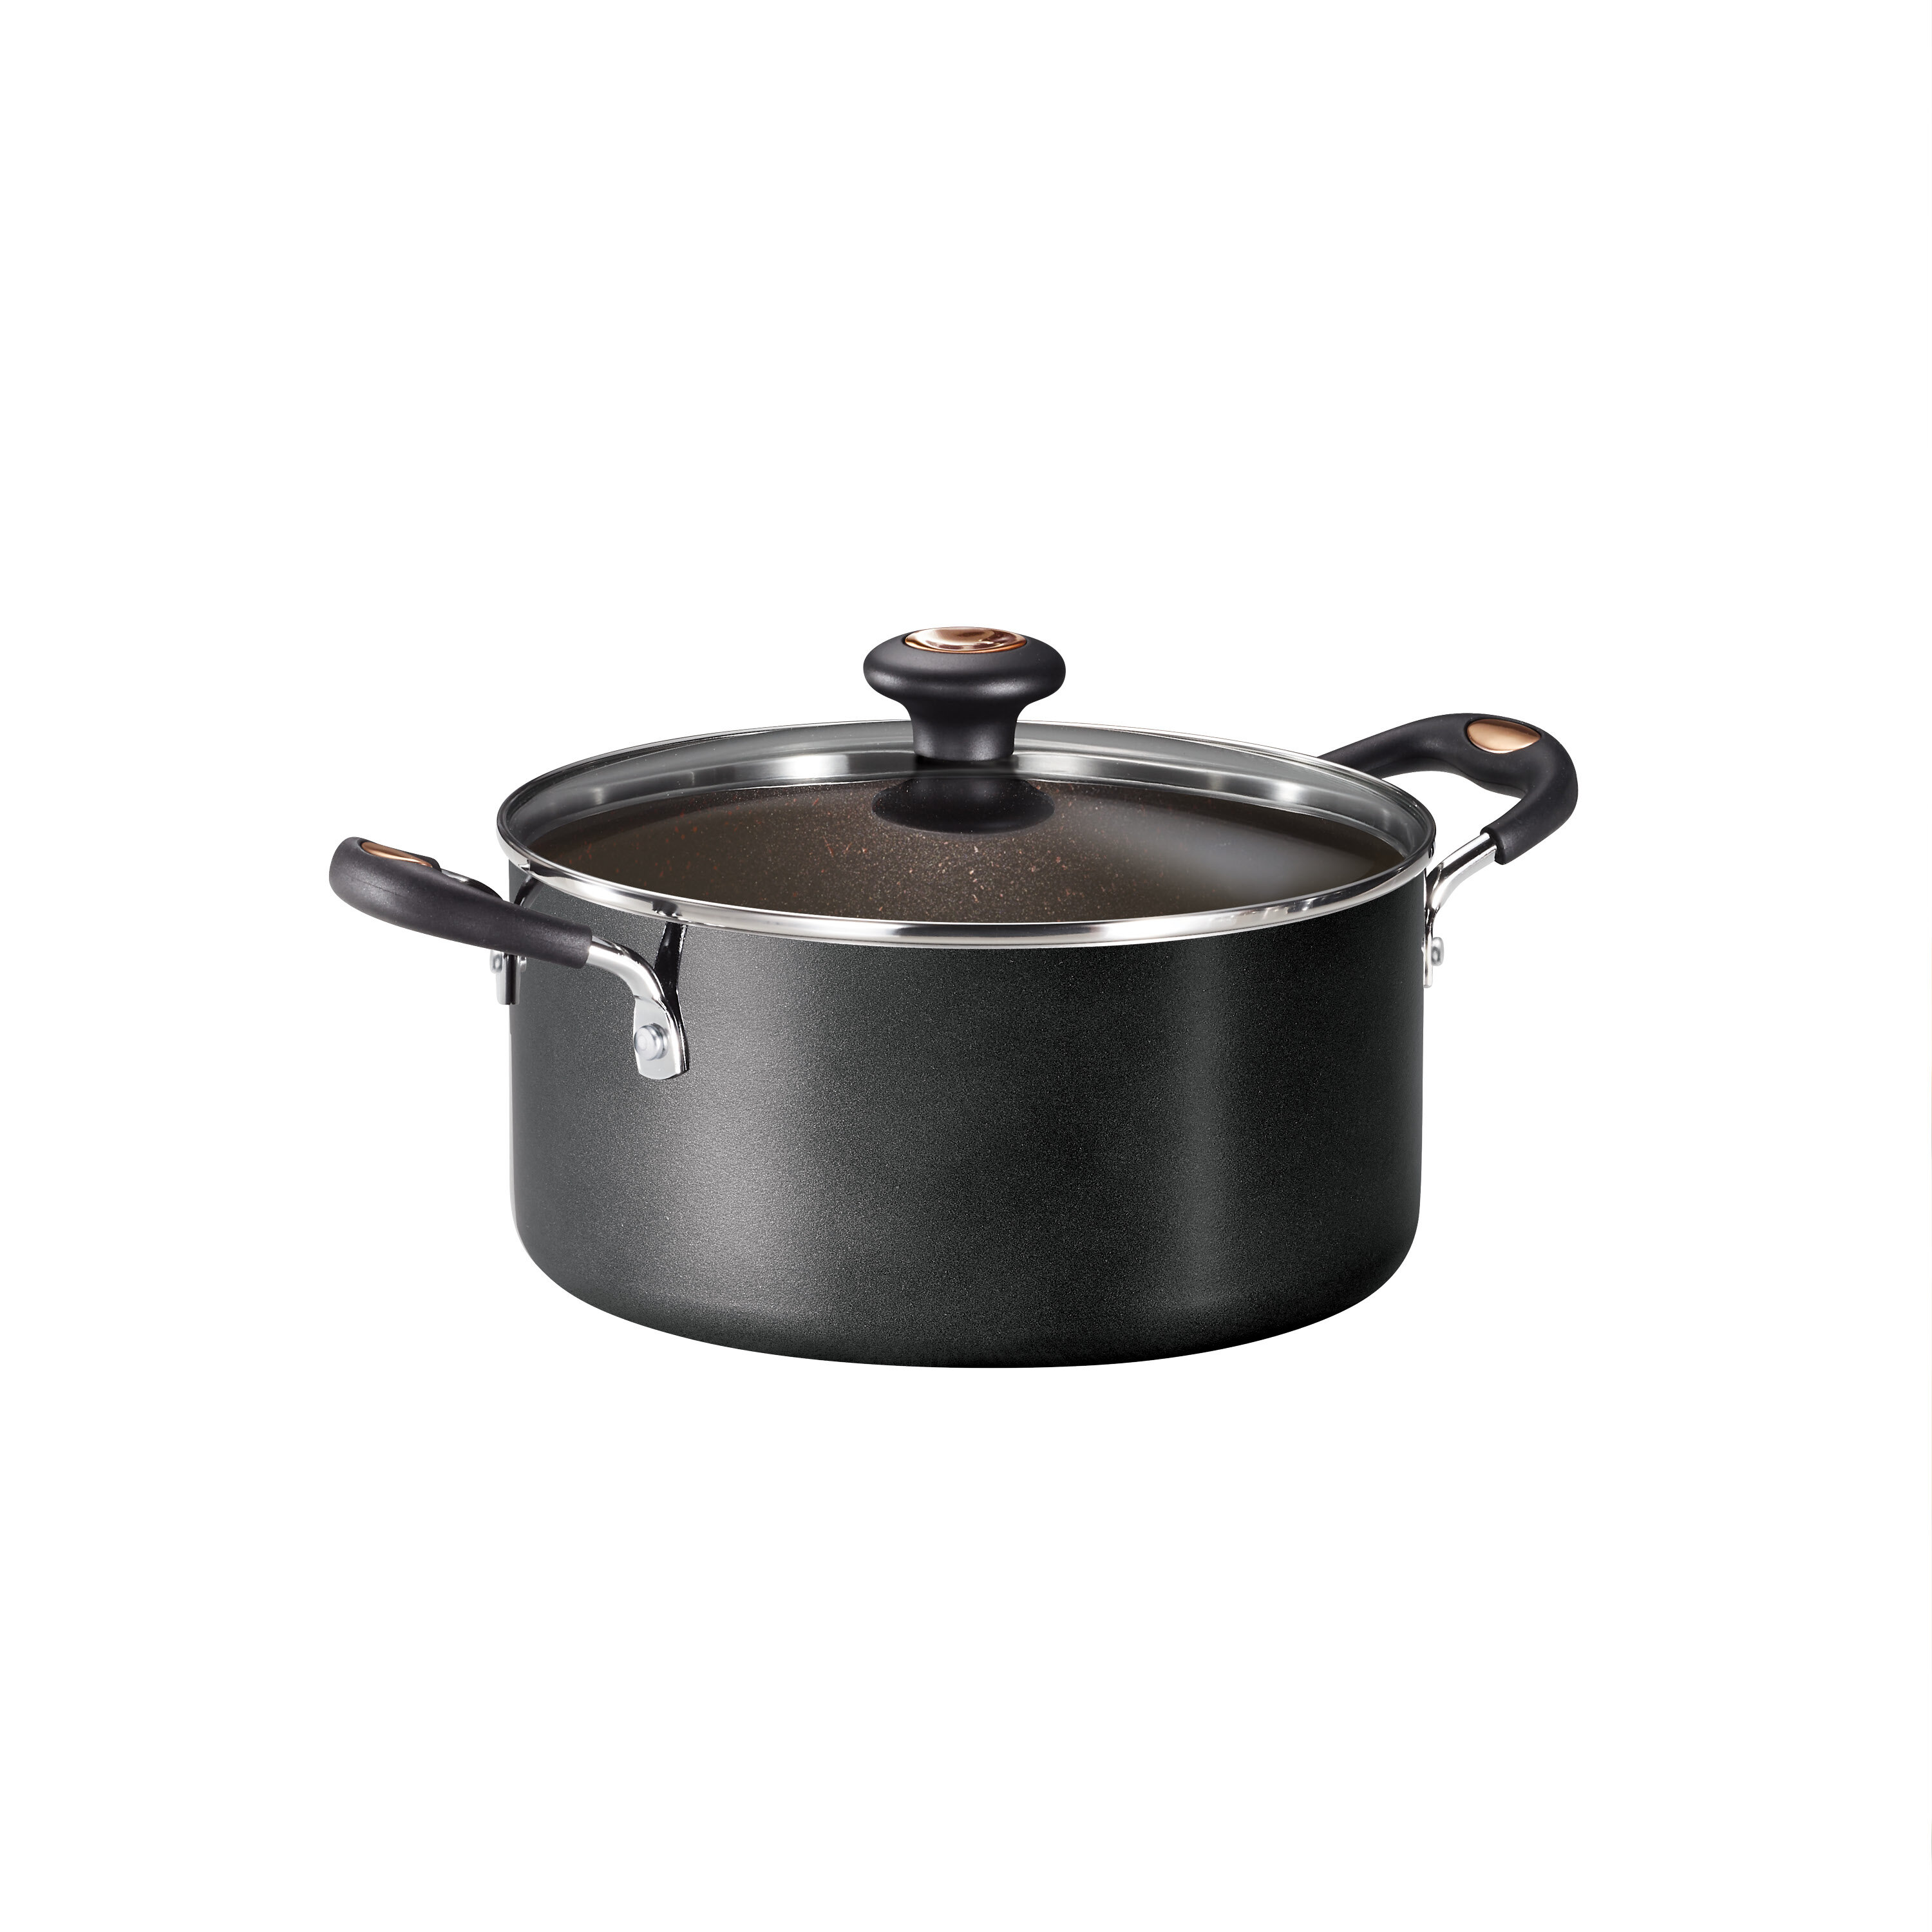  All-Clad Essentials Hard Anodized Nonstick Square Dutch Oven  with Trivet 5 Quart Oven Safe 350F Pots and Pans, Cookware Black: Home &  Kitchen